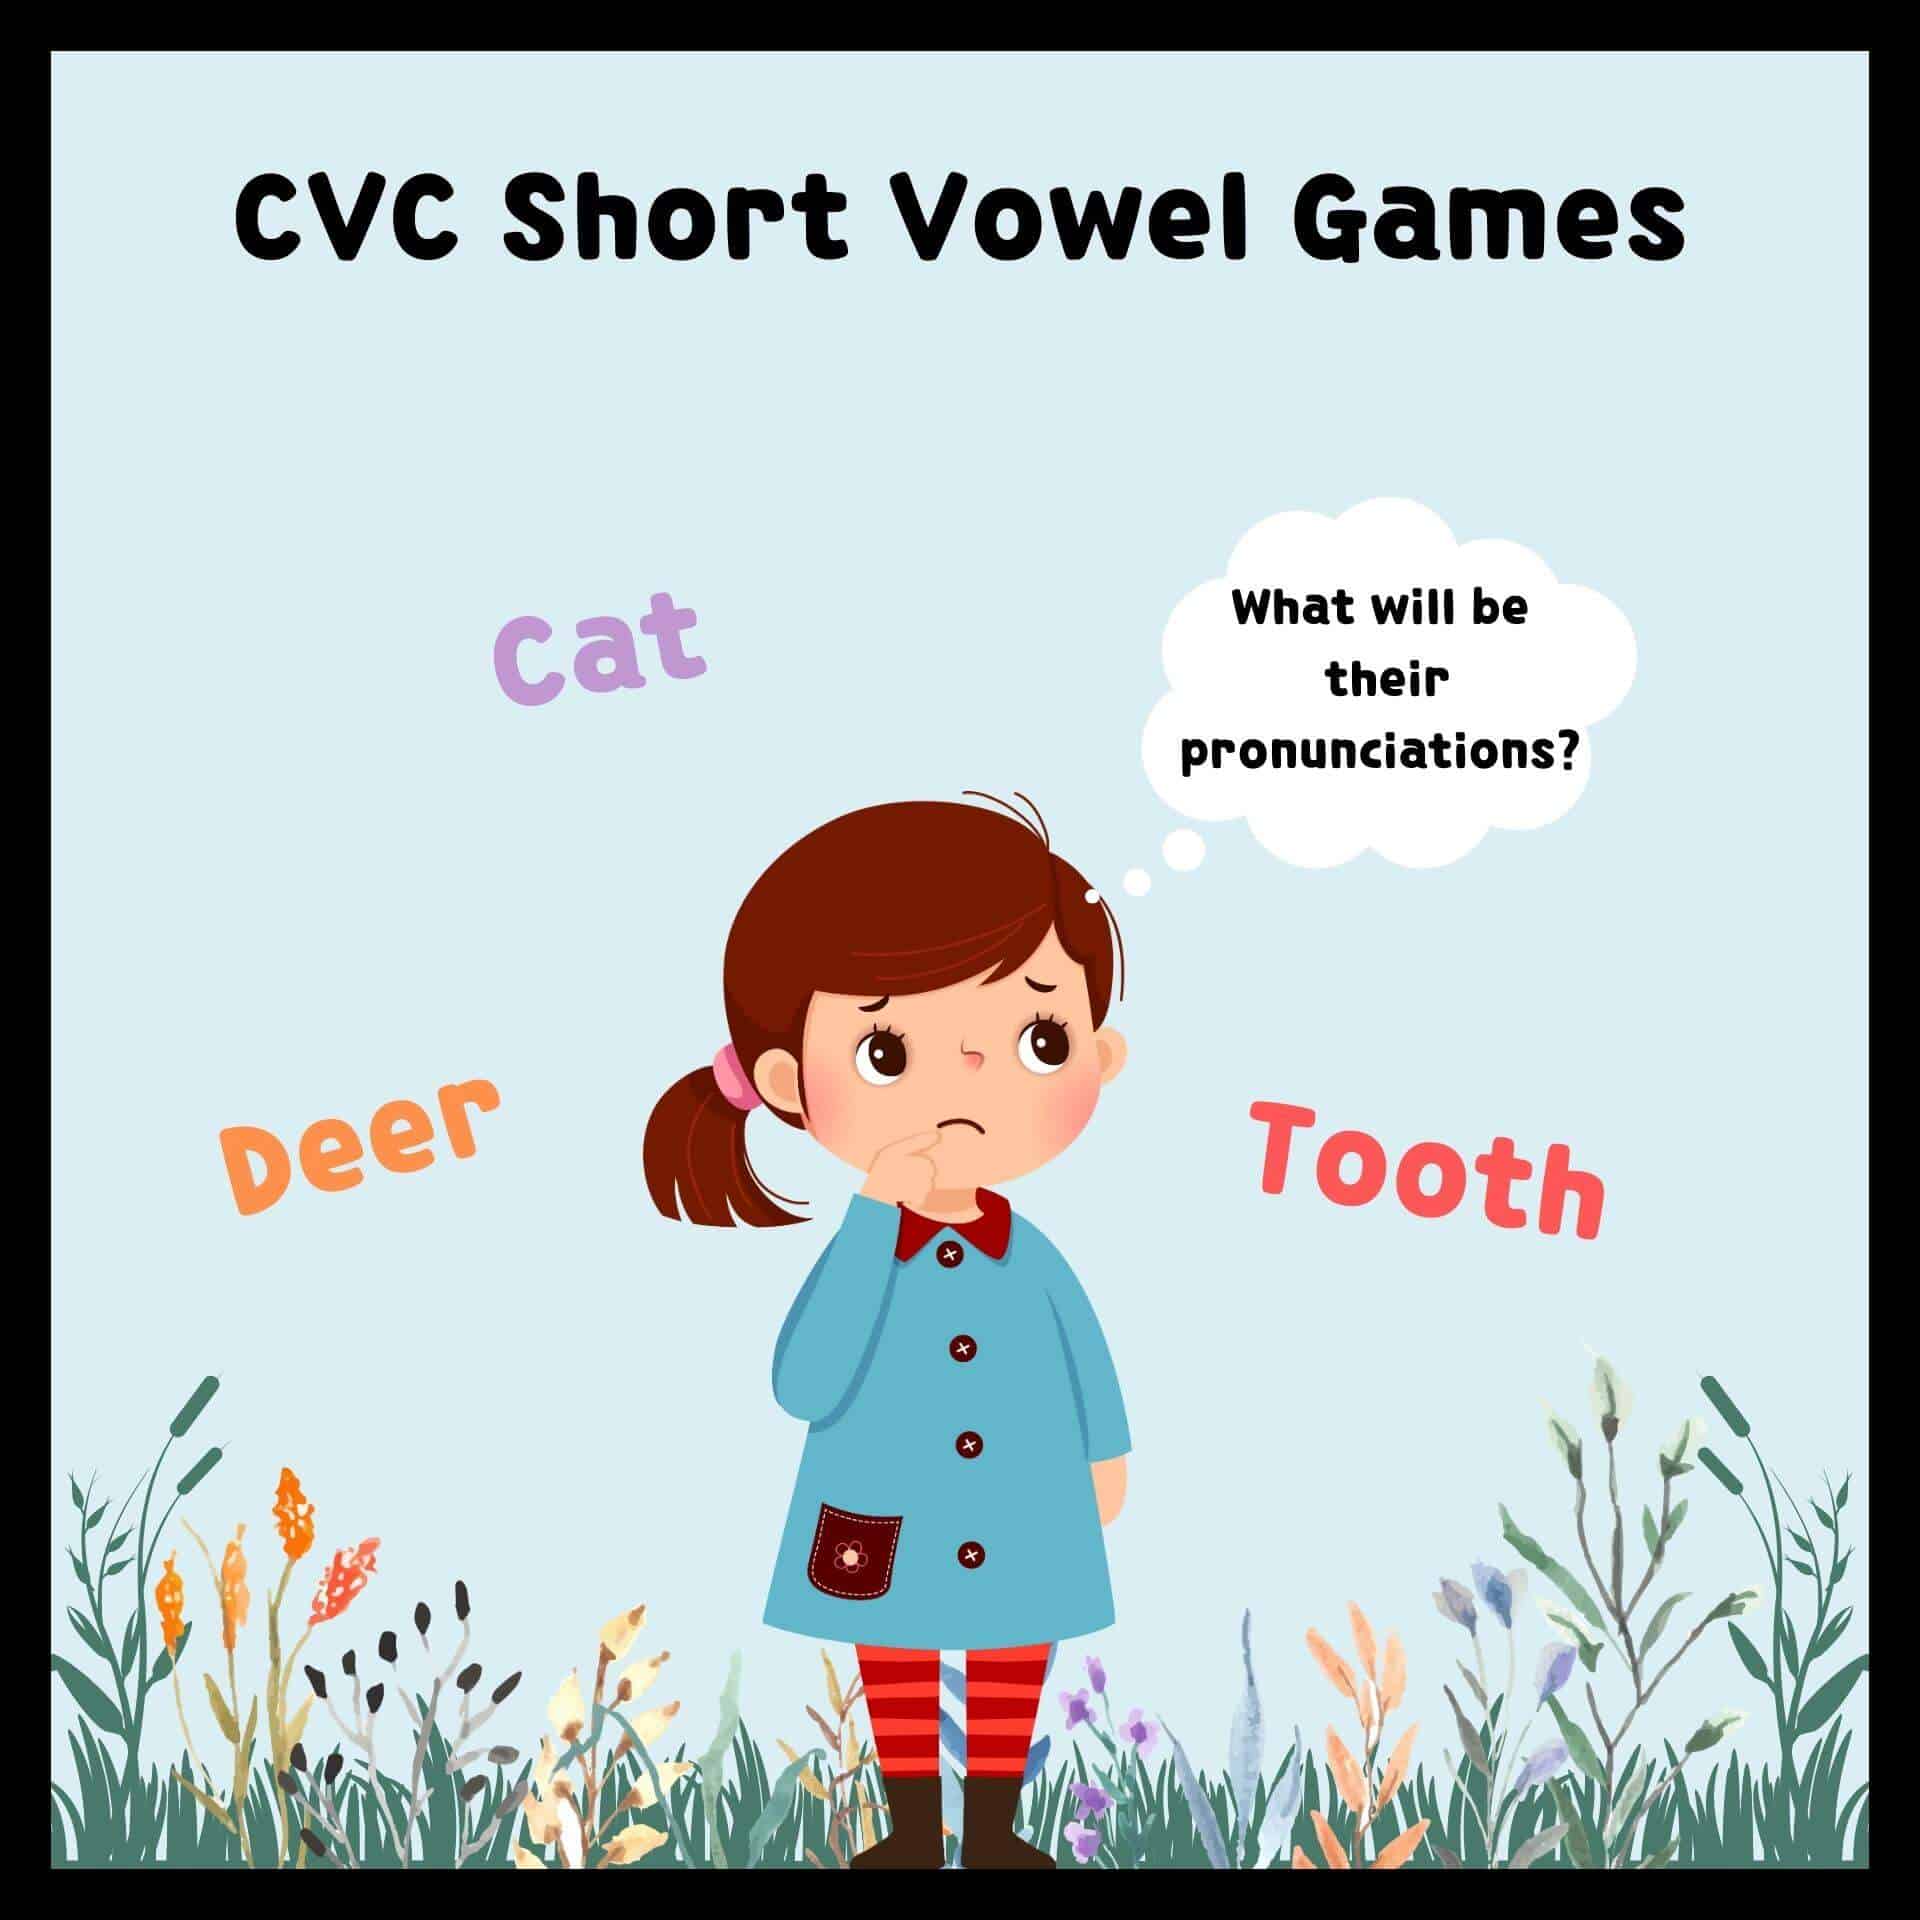 A girl is playing CVC Short Vowel Games